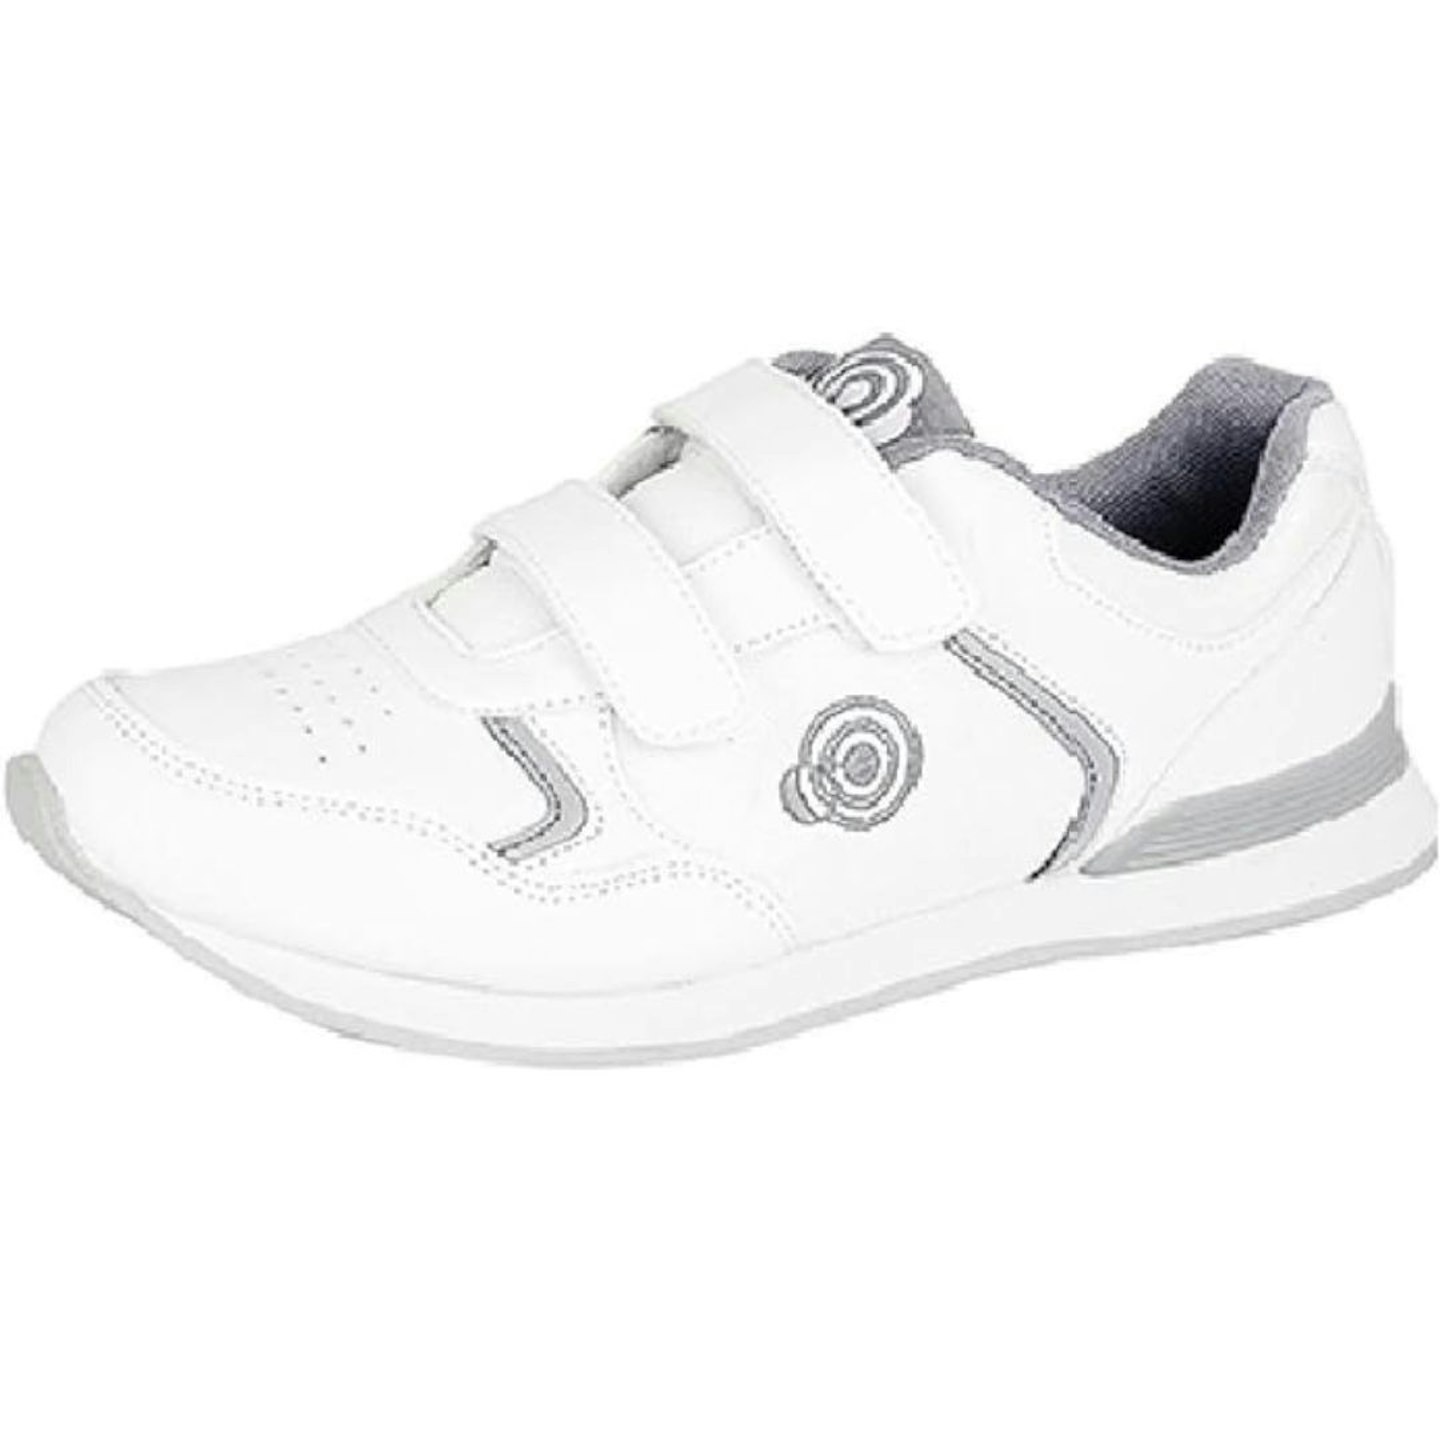 Lady Skipper Ladies Touch Fasten Bowling Shoes